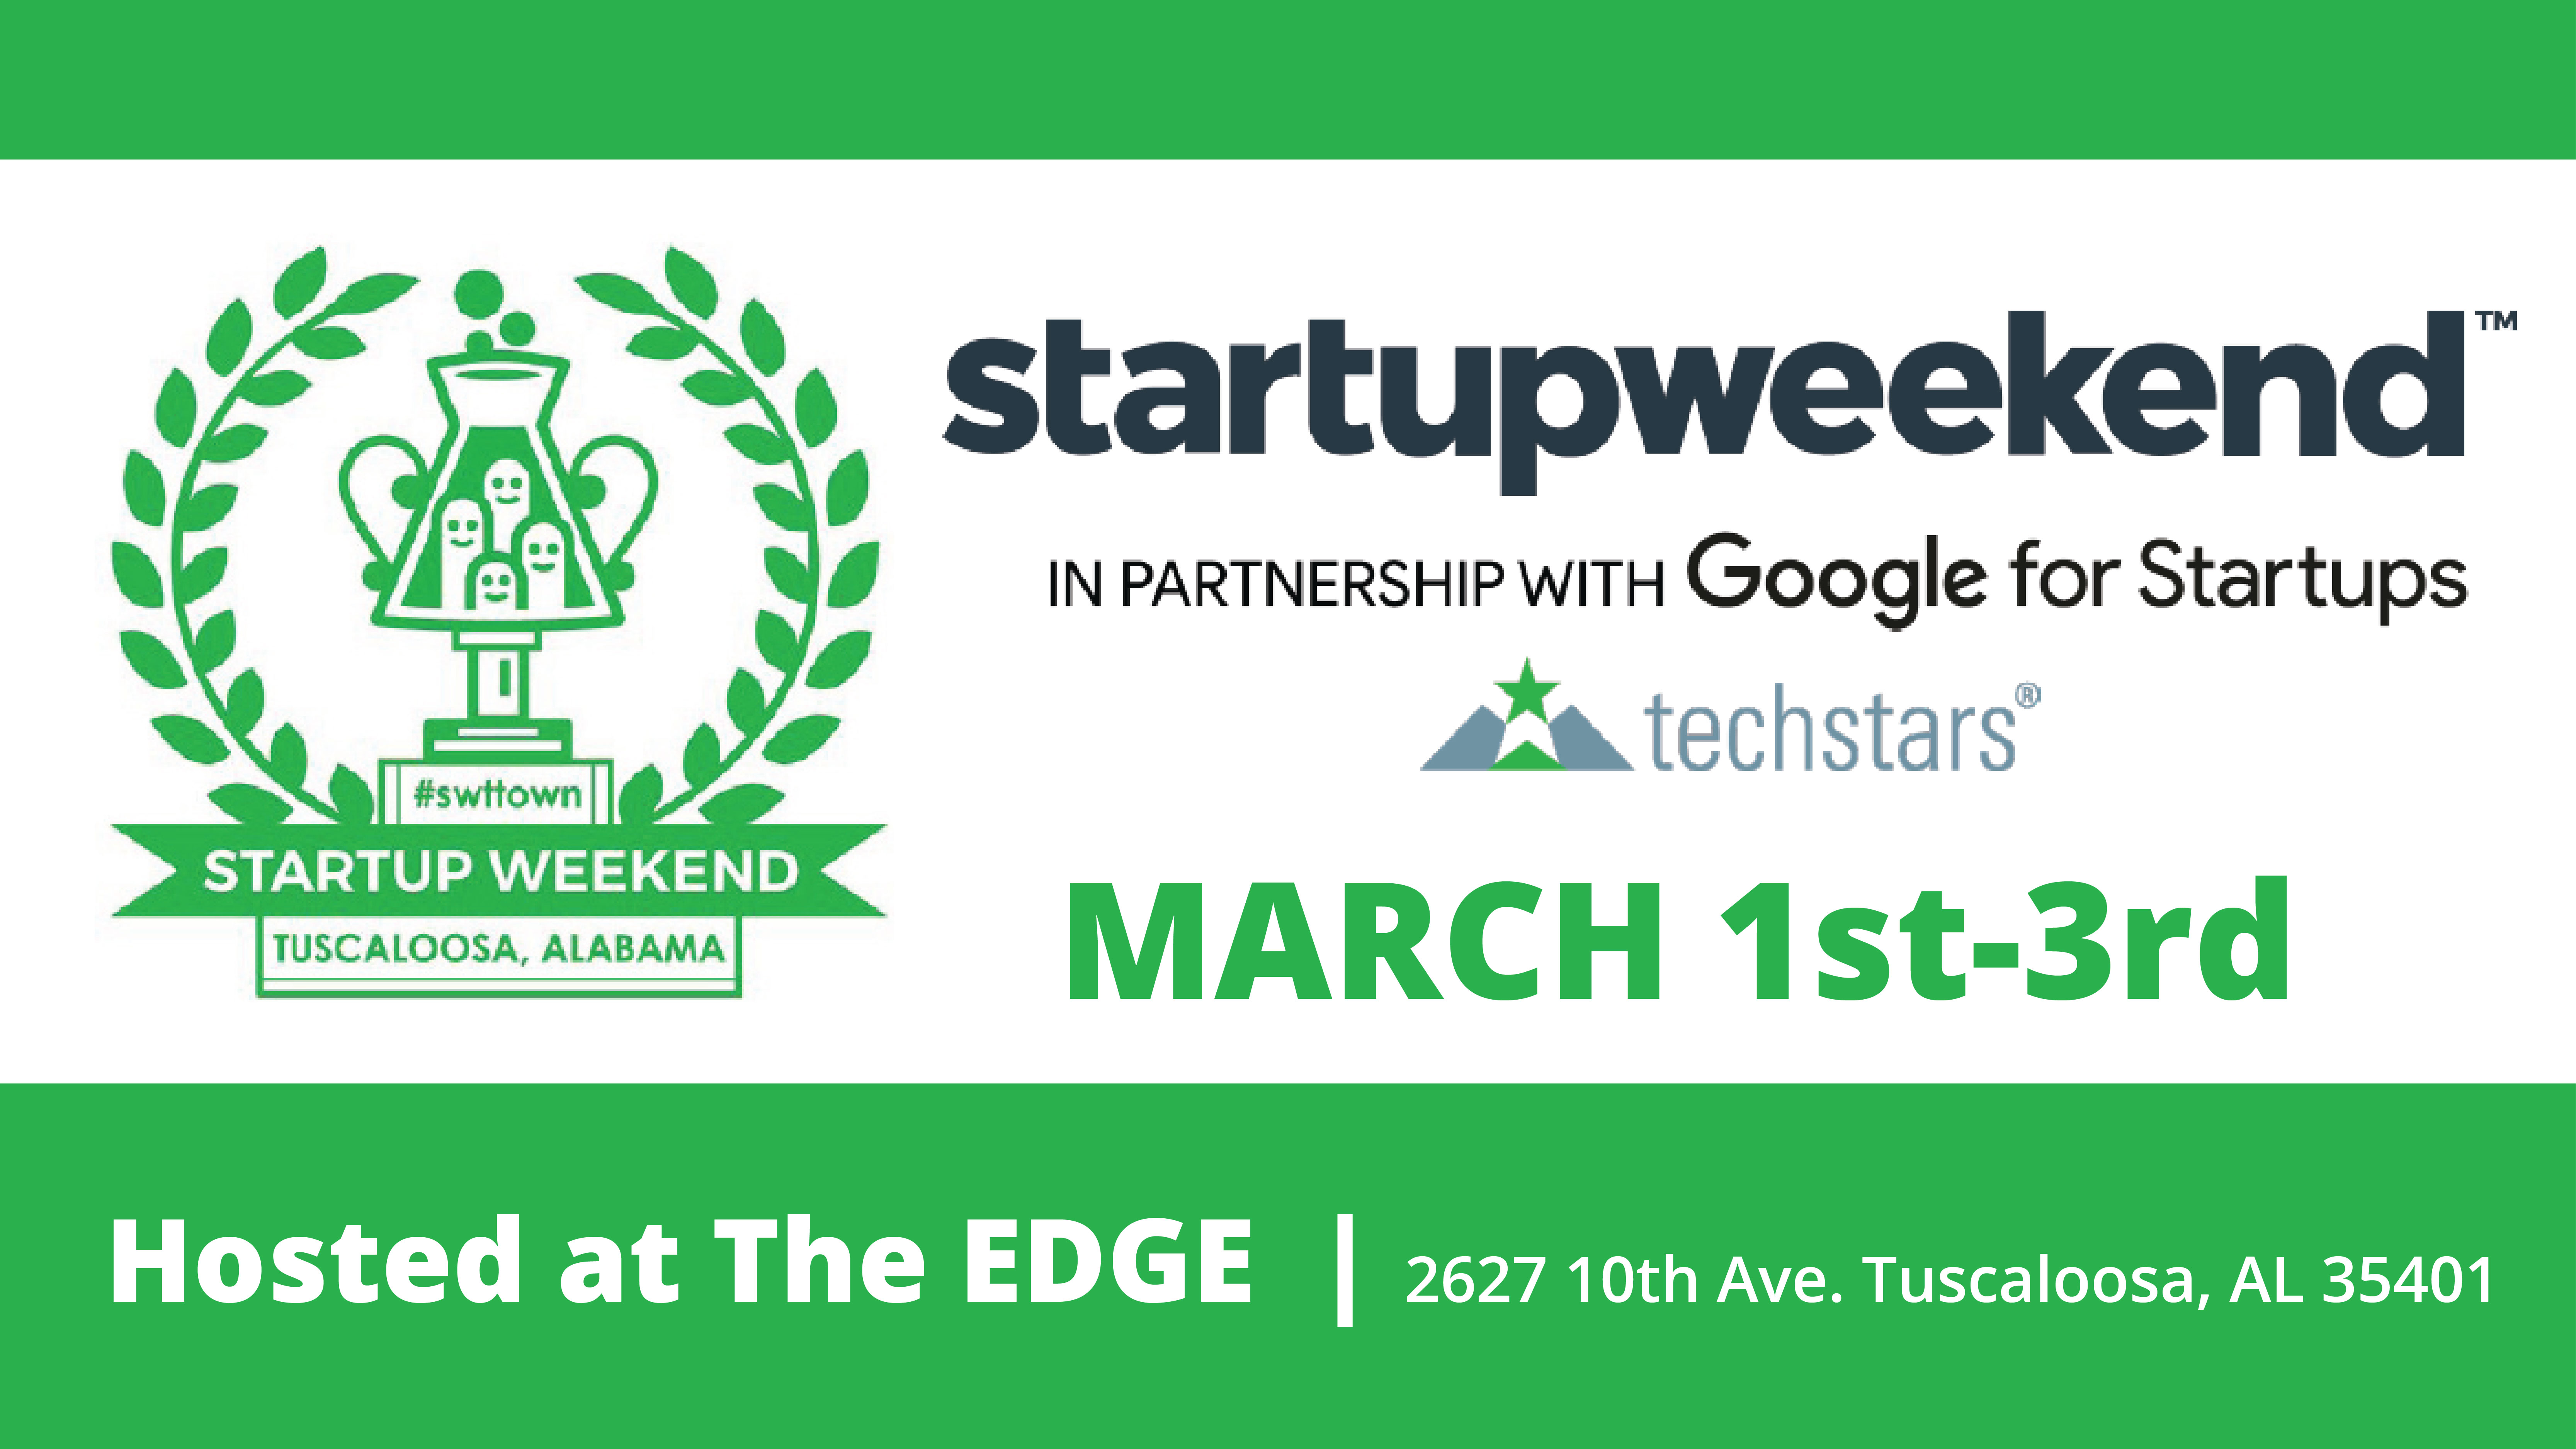 Startup Weekend 2019 runs from March 1-3 at the EDGE